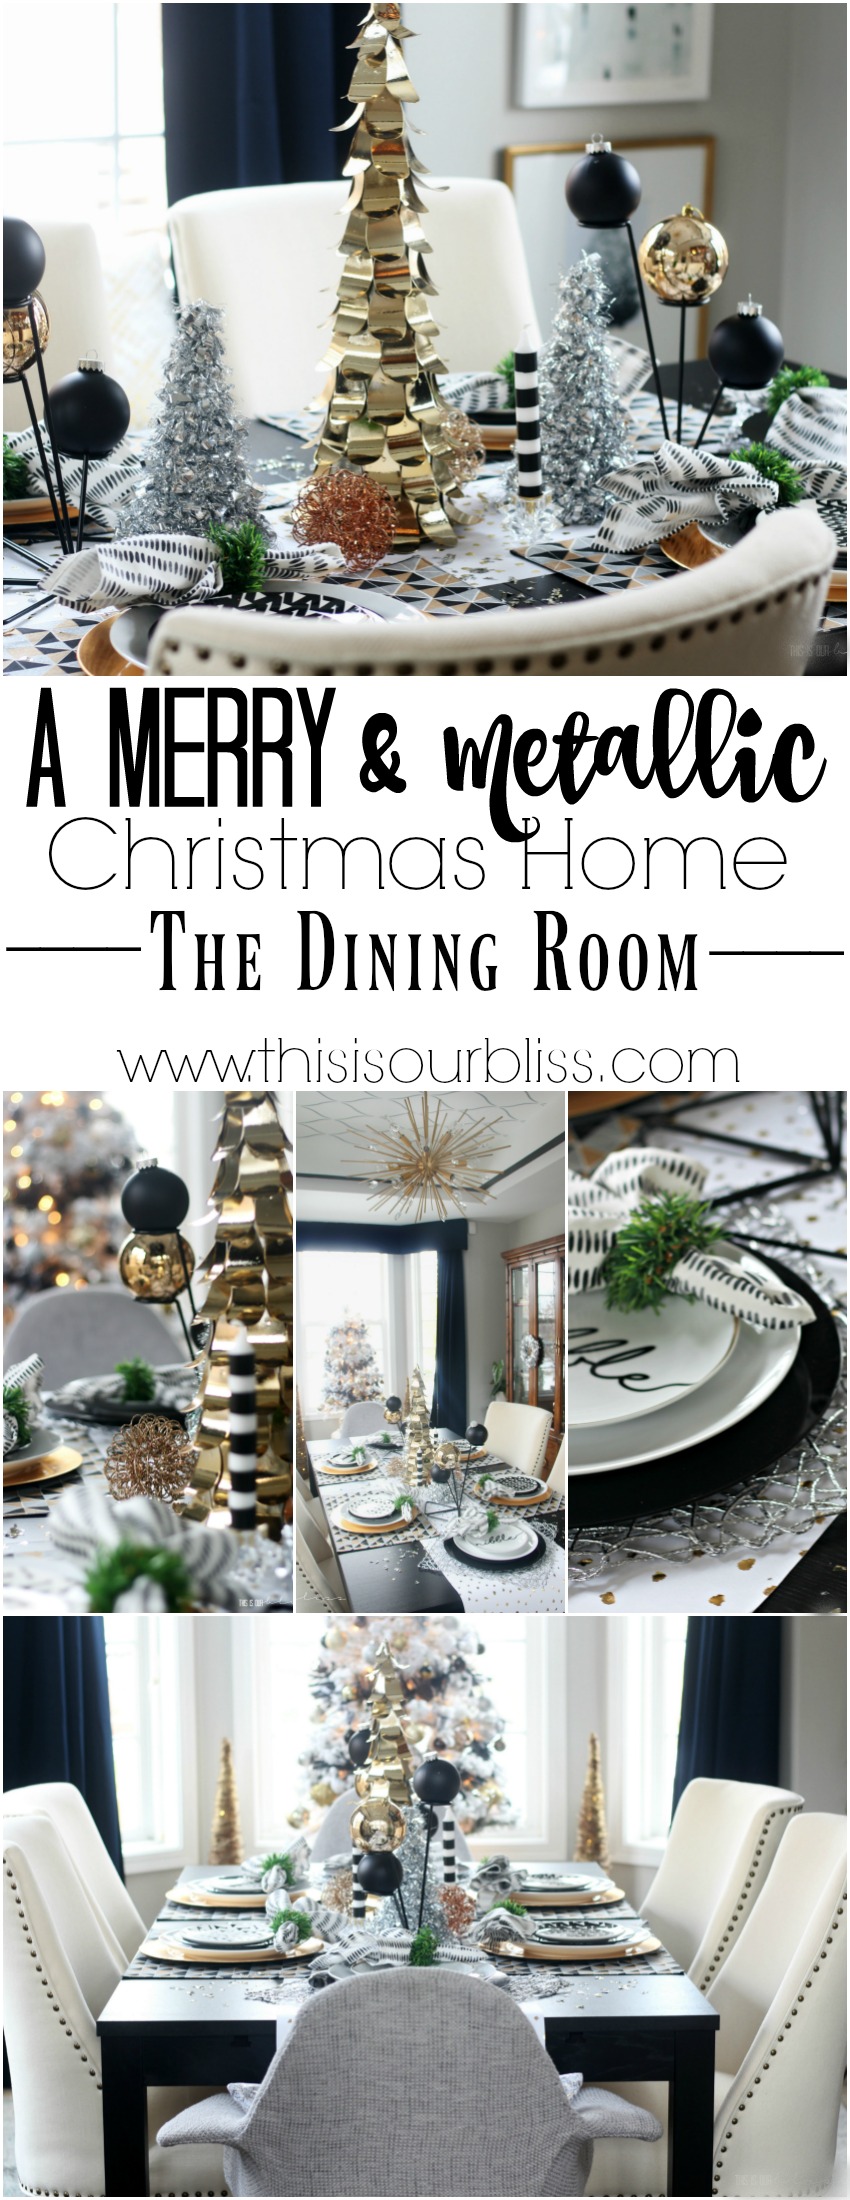 A Merry and Metallic Christmas Home | The Dining Room | This is our Bliss Merry & Metallic Christmas Home Tour 2016